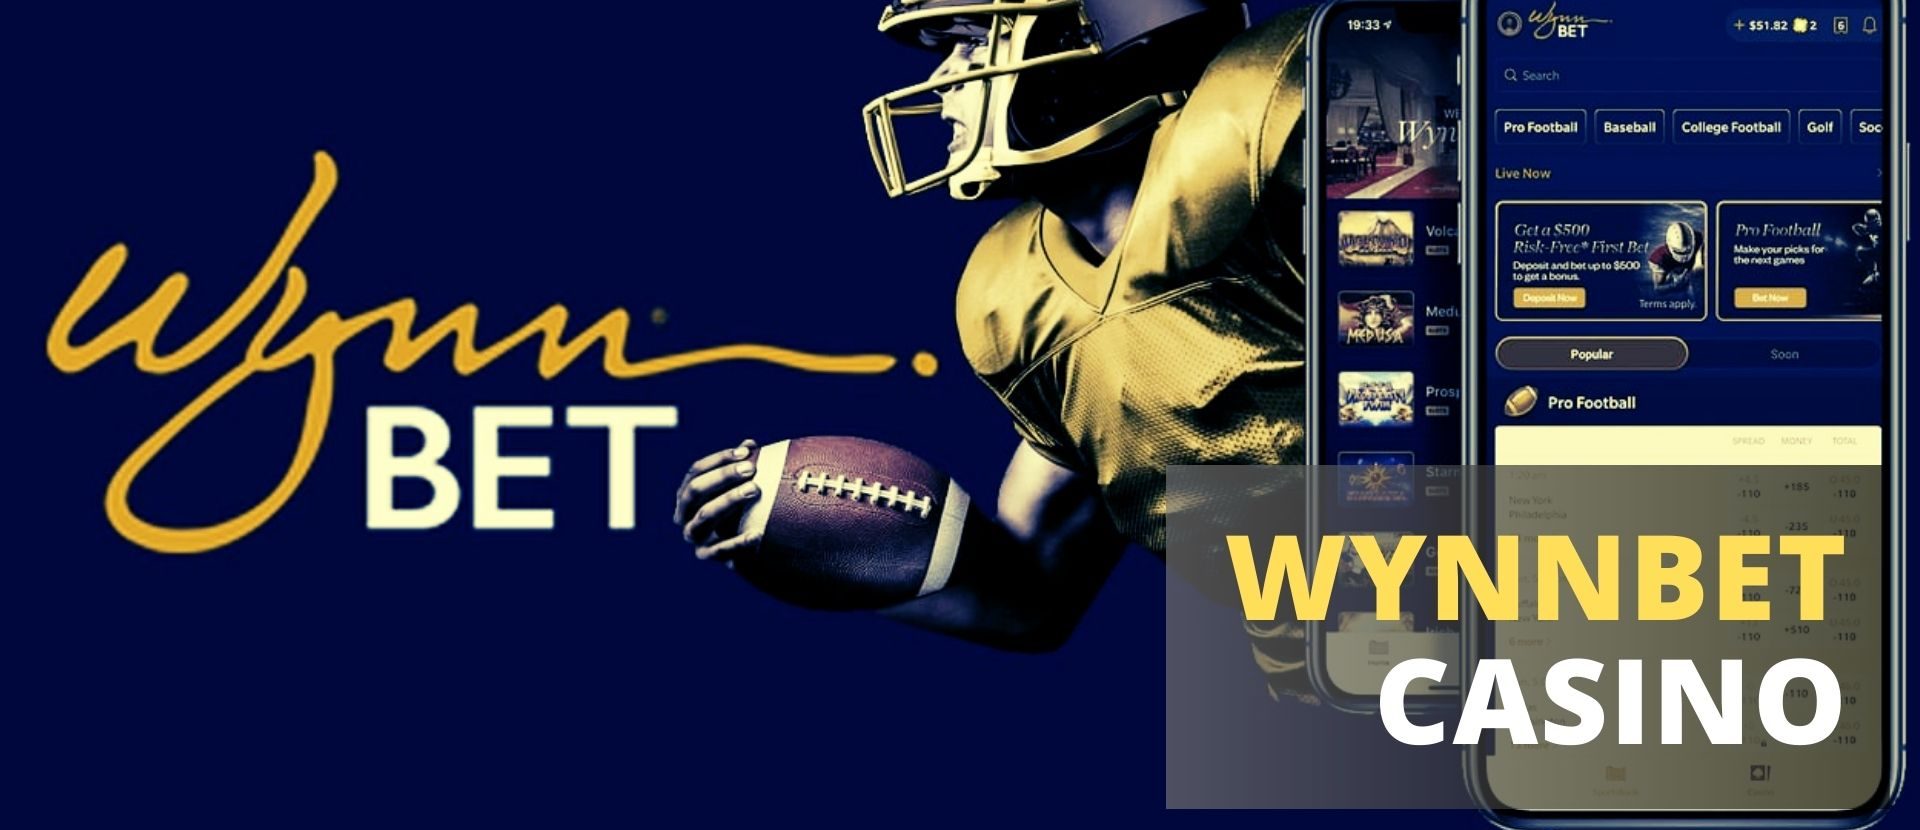 WynnBet Casino and Sportsbook: A Comprehensive Review